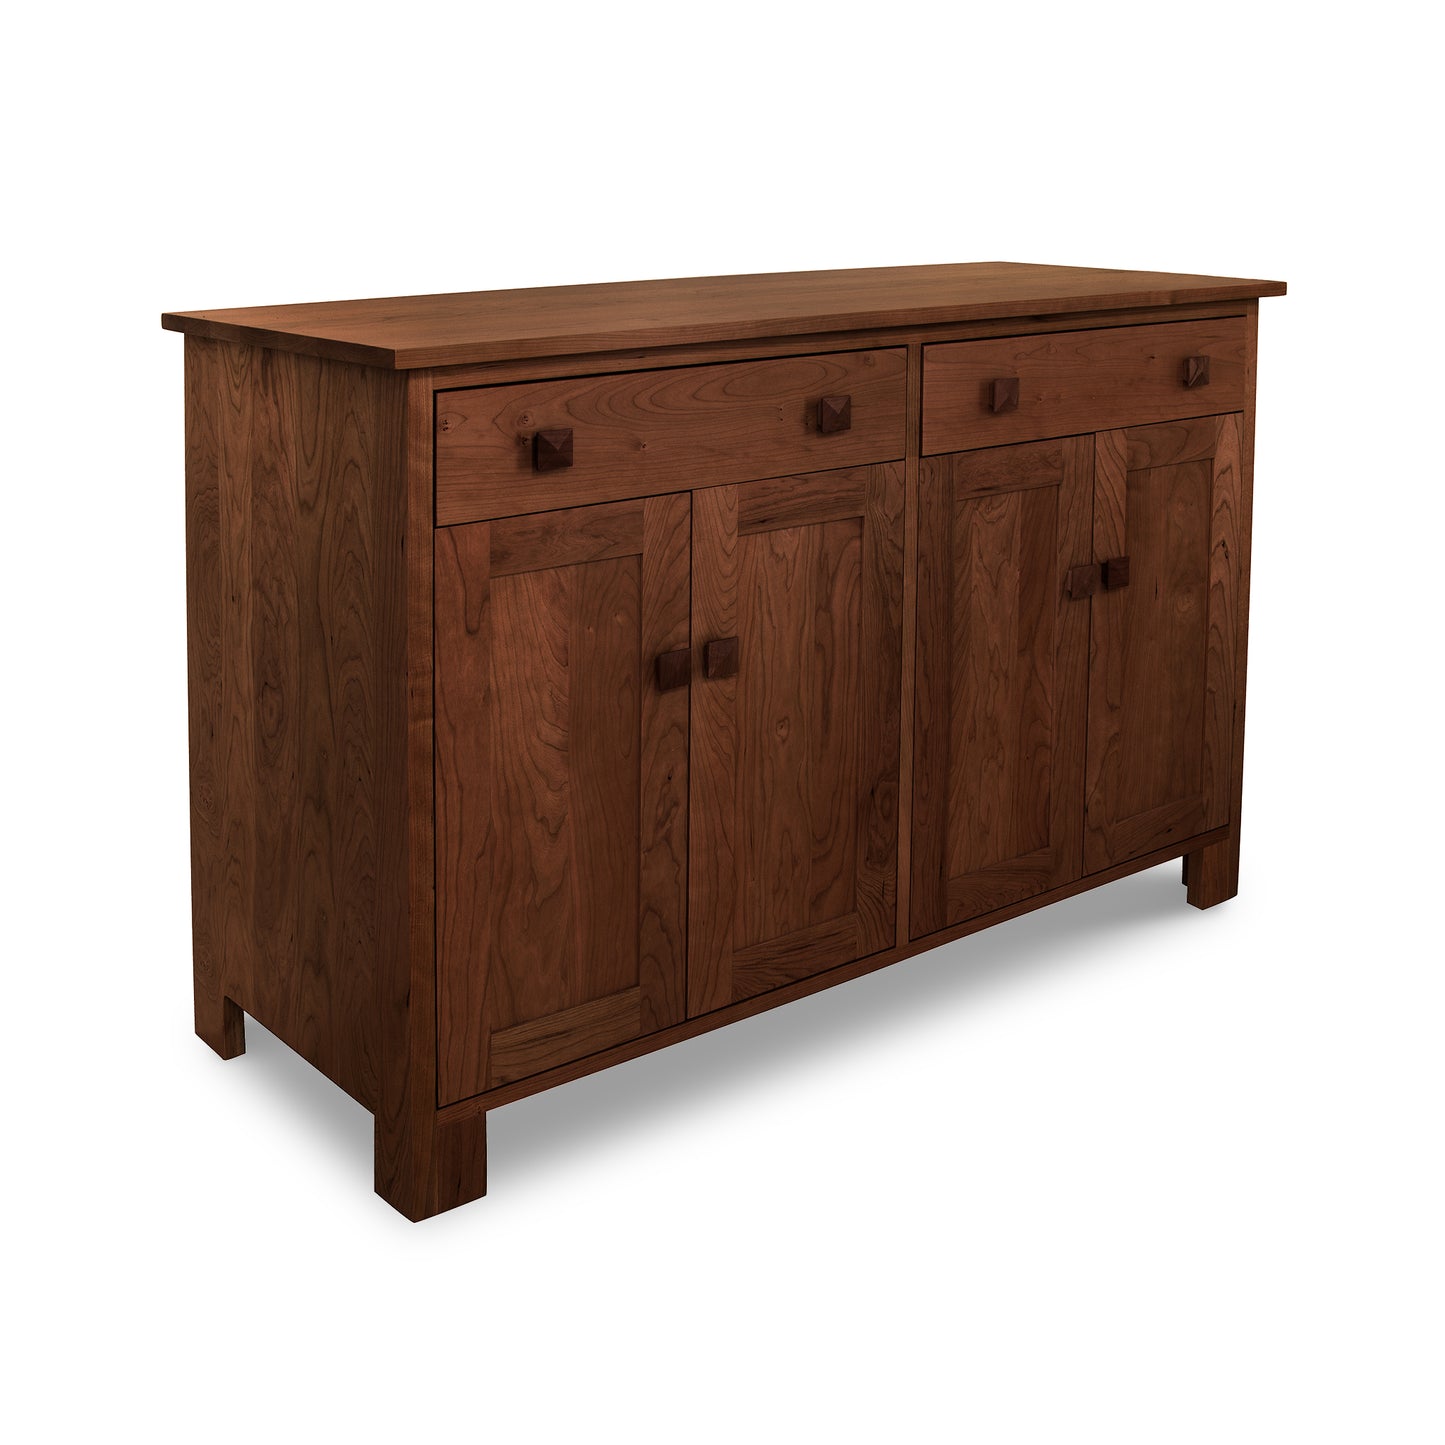 A Lyndon Furniture Modern Mission Buffet with two doors and two drawers.